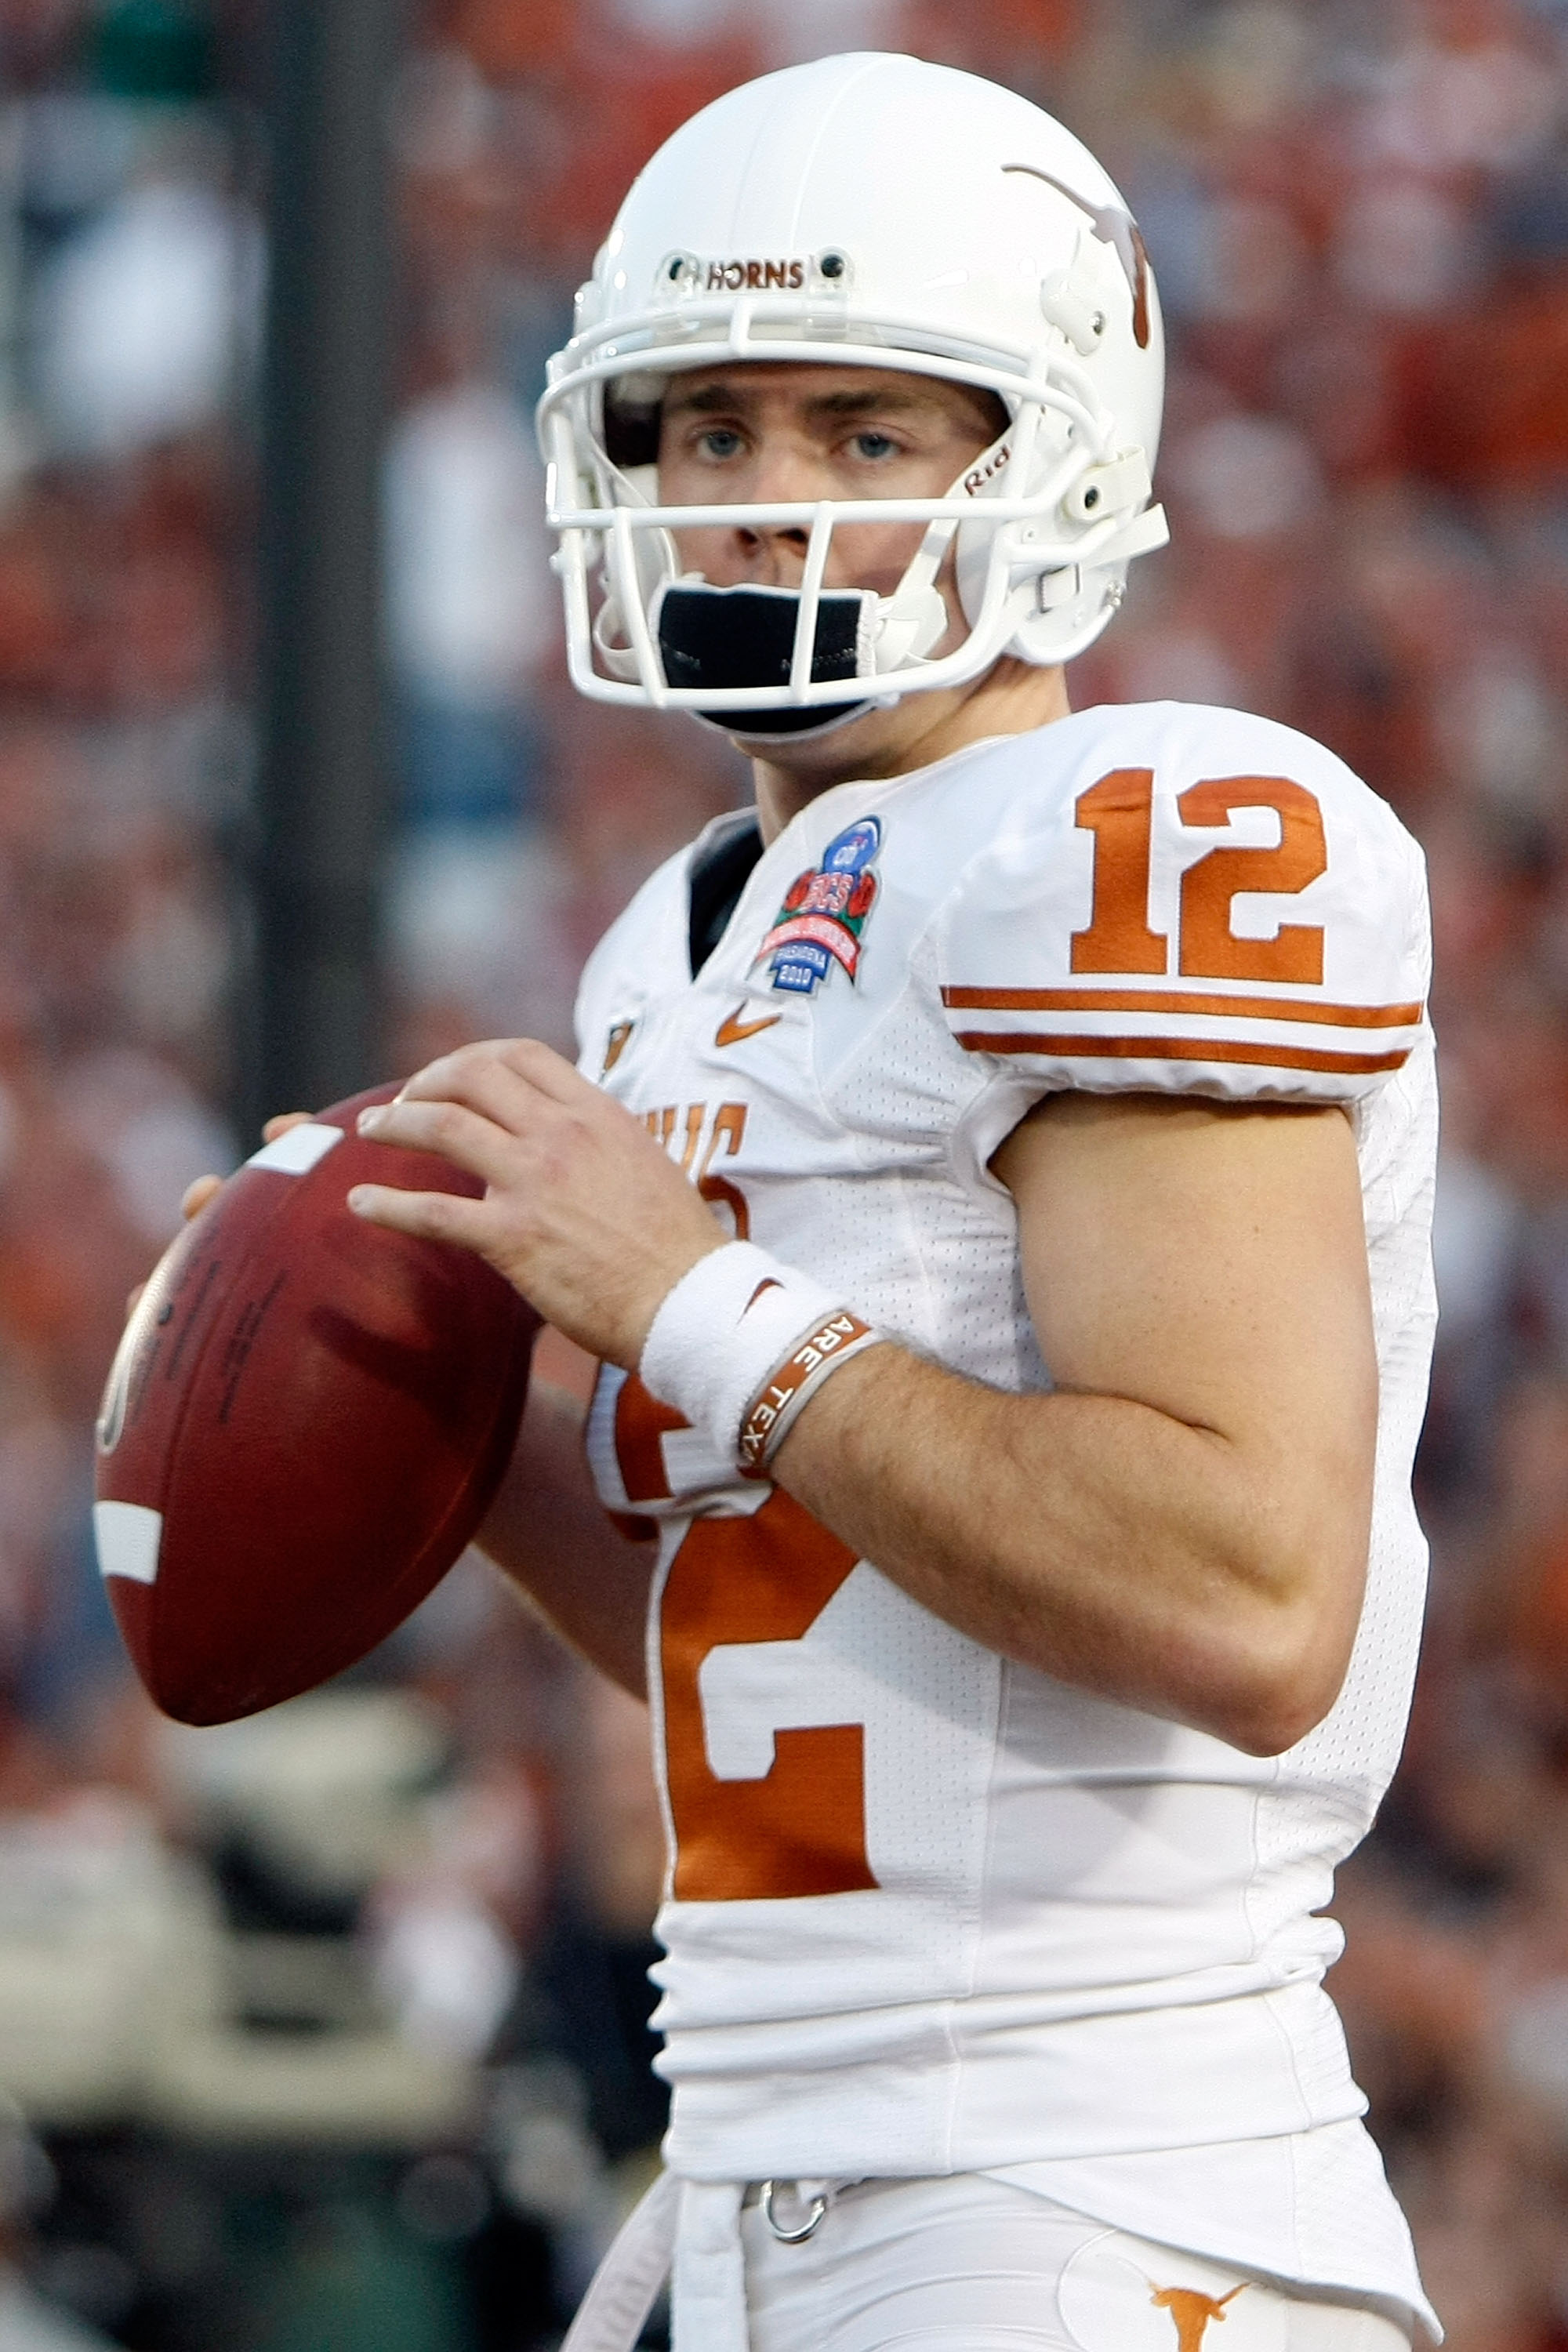 PASADENA, CA - JANUARY 07:  Quarterback Colt McCoy #12 of the Texas Longhorns looks on before taking on the Alabama Crimson Tide in the Citi BCS National Championship game at the Rose Bowl on January 7, 2010 in Pasadena, California.  (Photo by Jeff Gross/